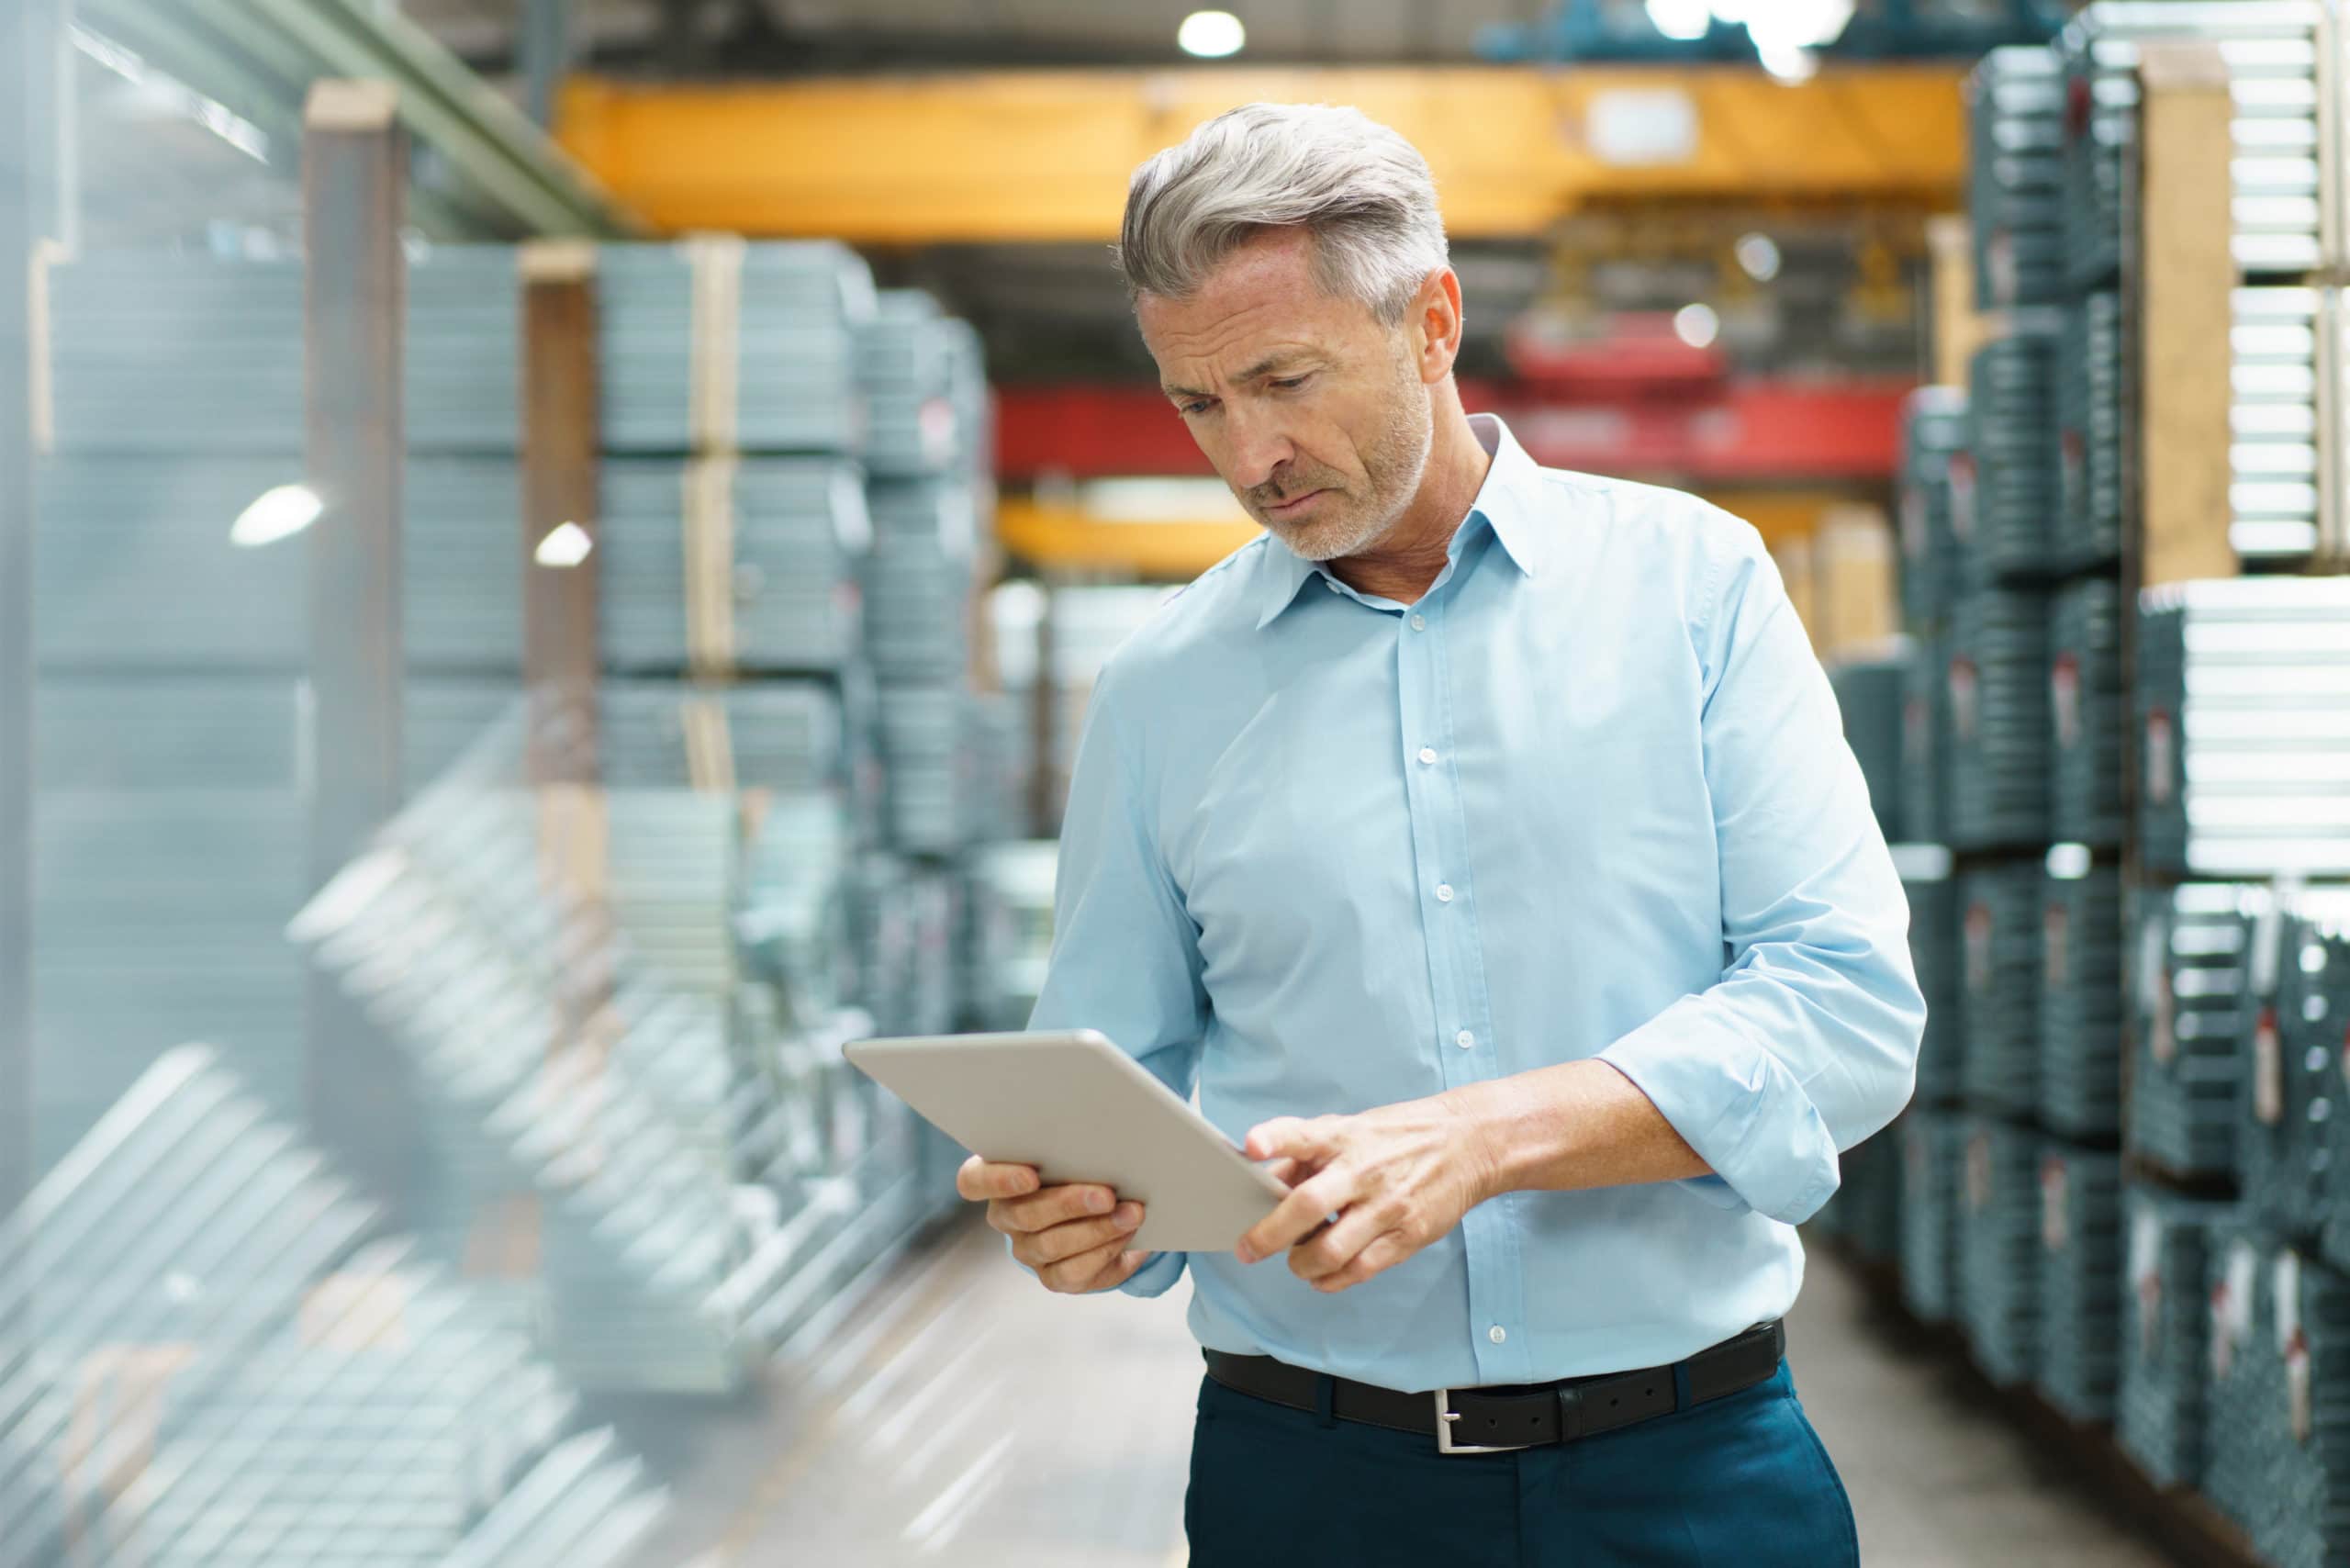 Man in warehouse reading tablet in hand